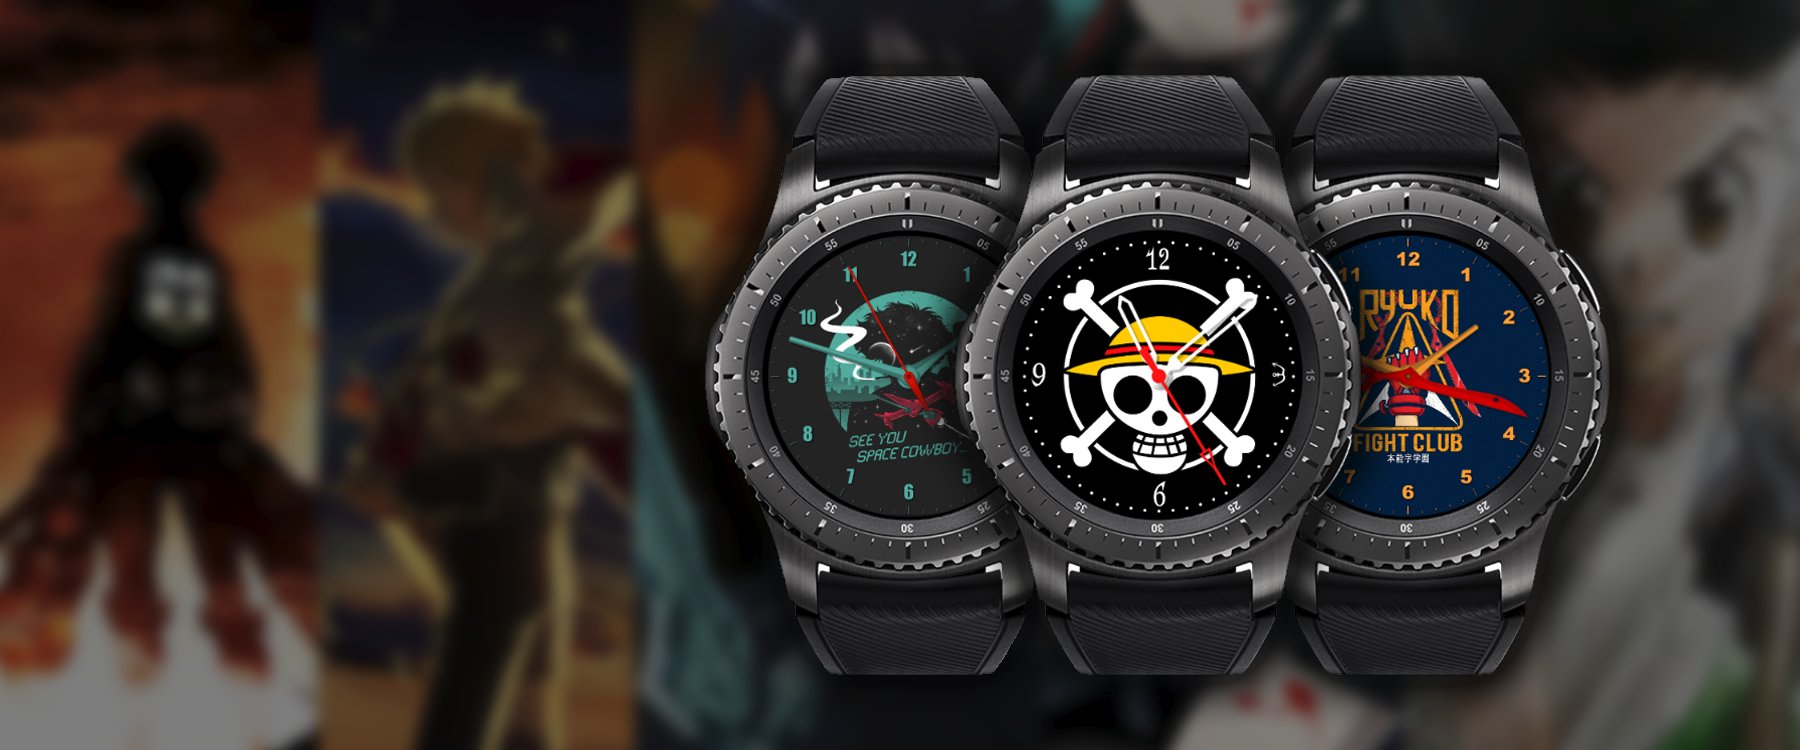 Discover more than 73 anime watch face latest  induhocakina